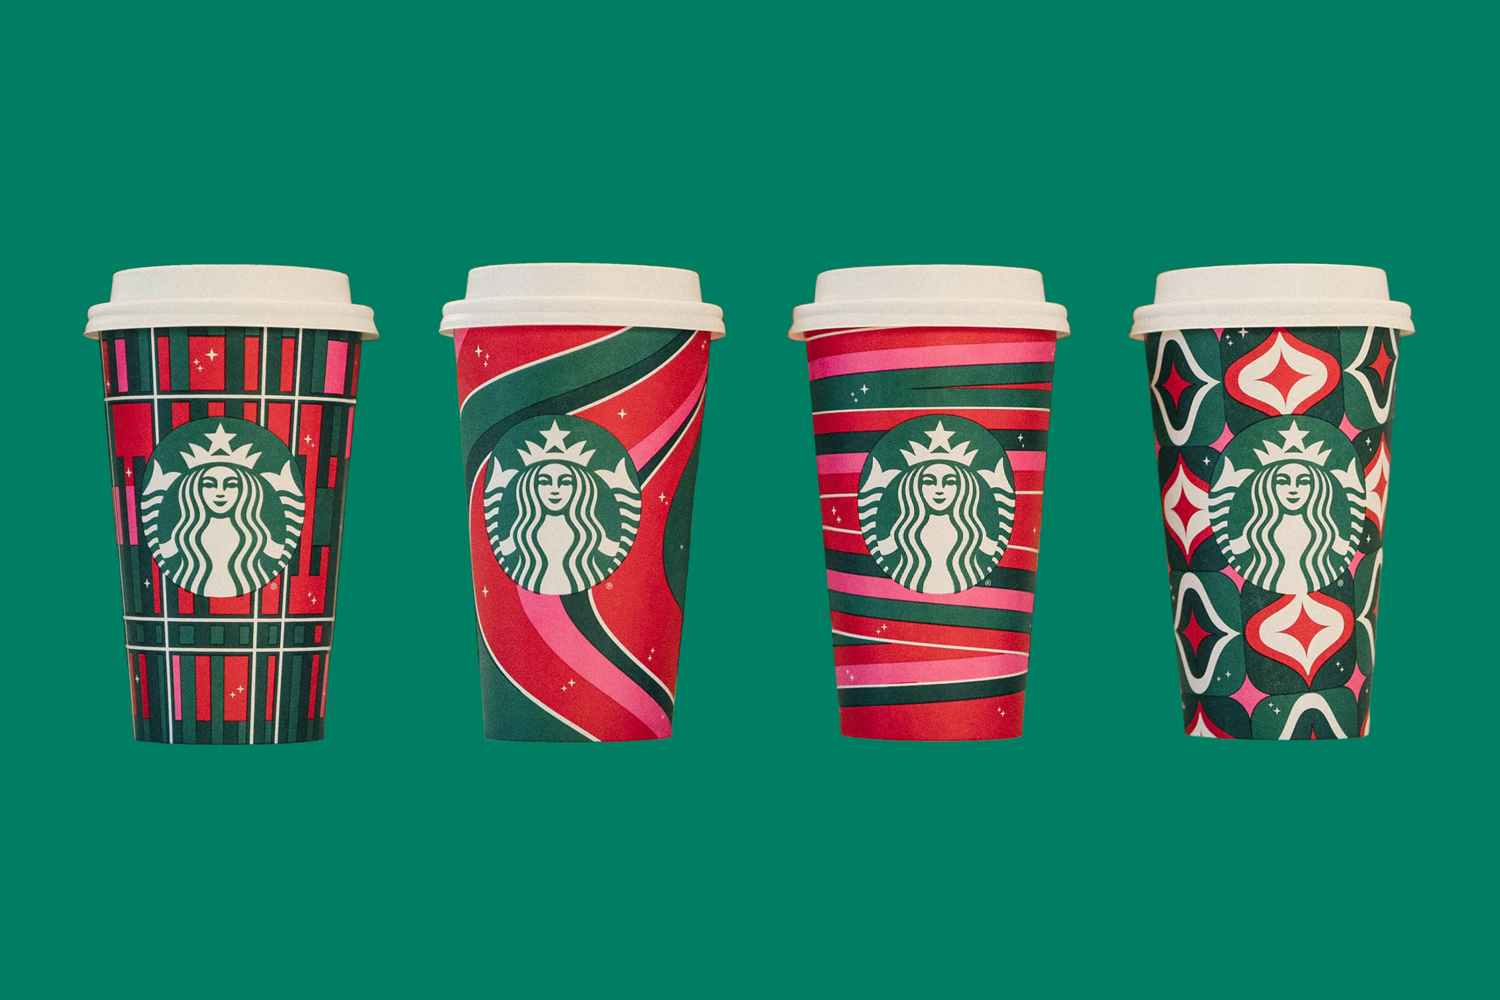 Hudson Valley Starbucks Giving Out Free Reusable Cups Friday